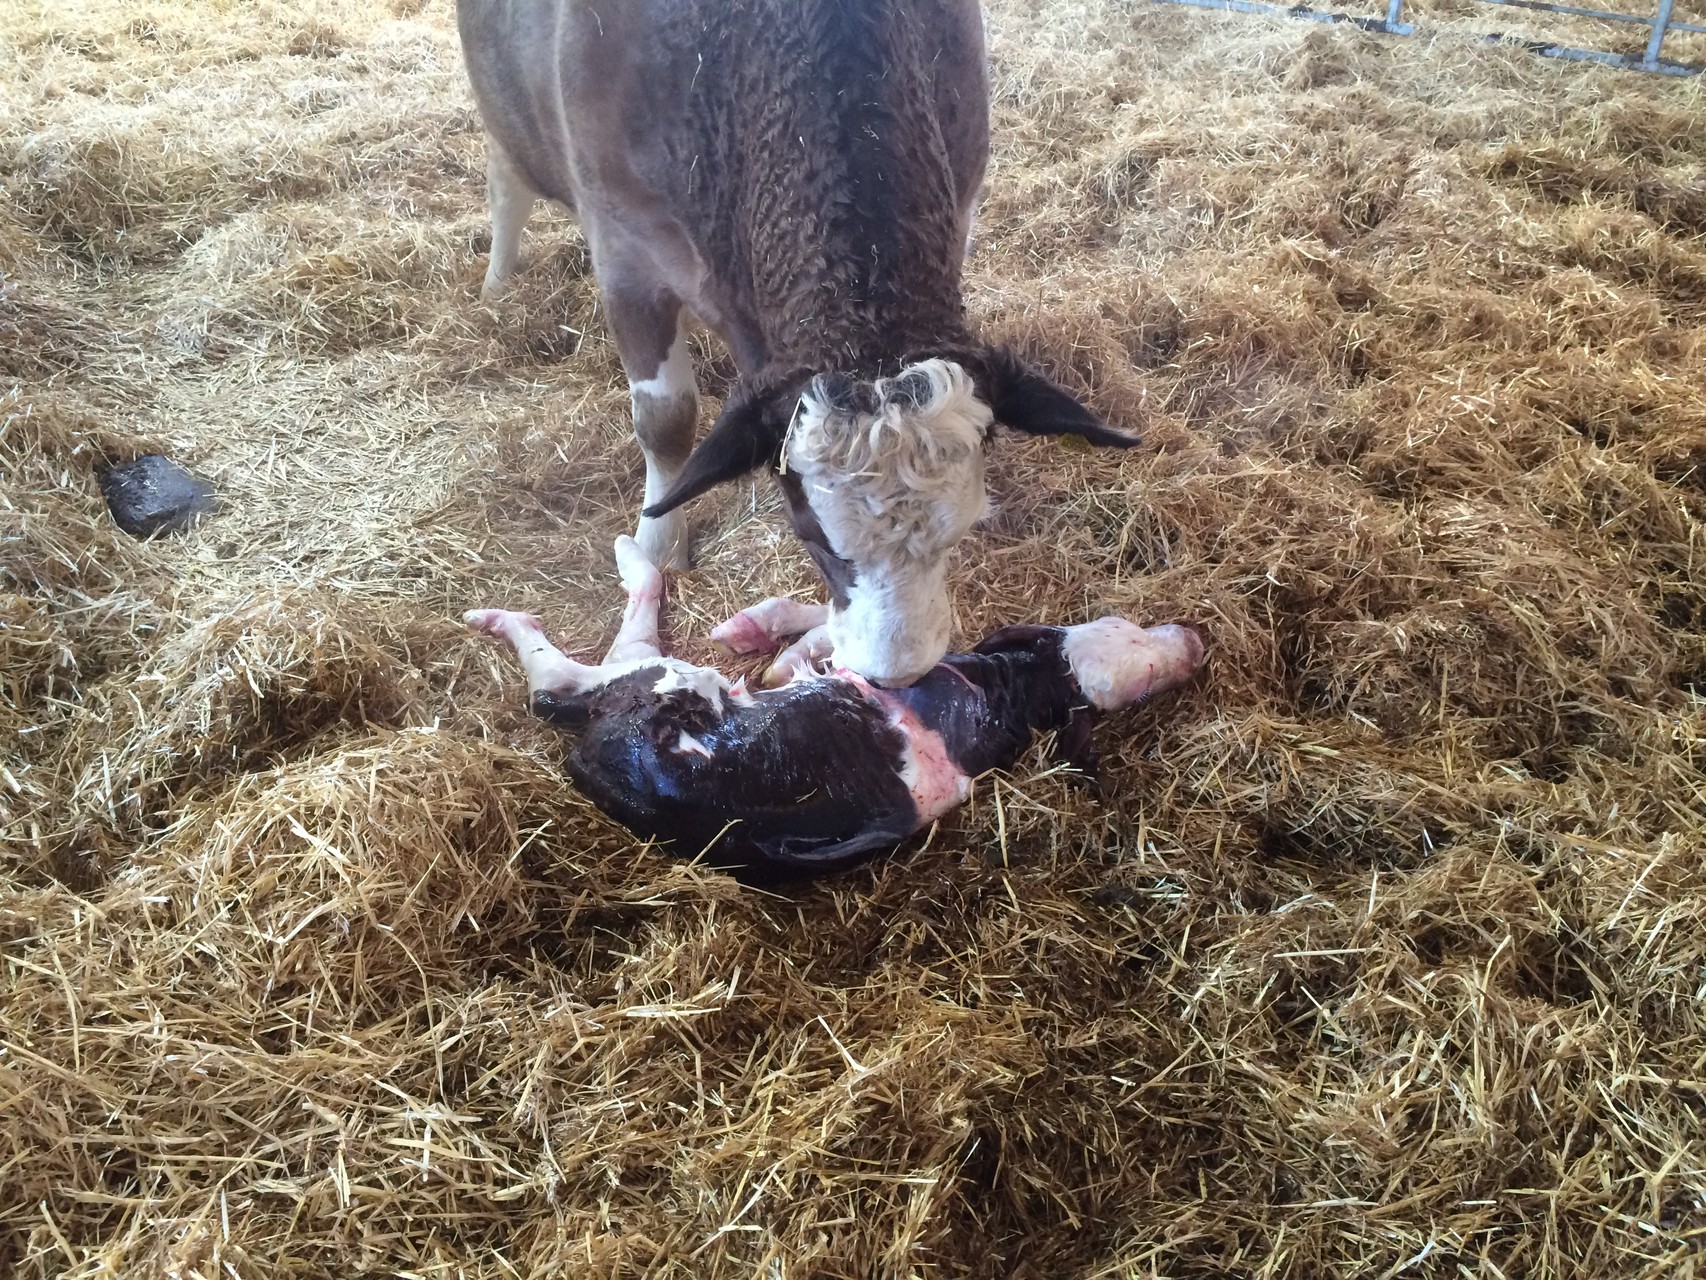 Patch & her just born bull calf